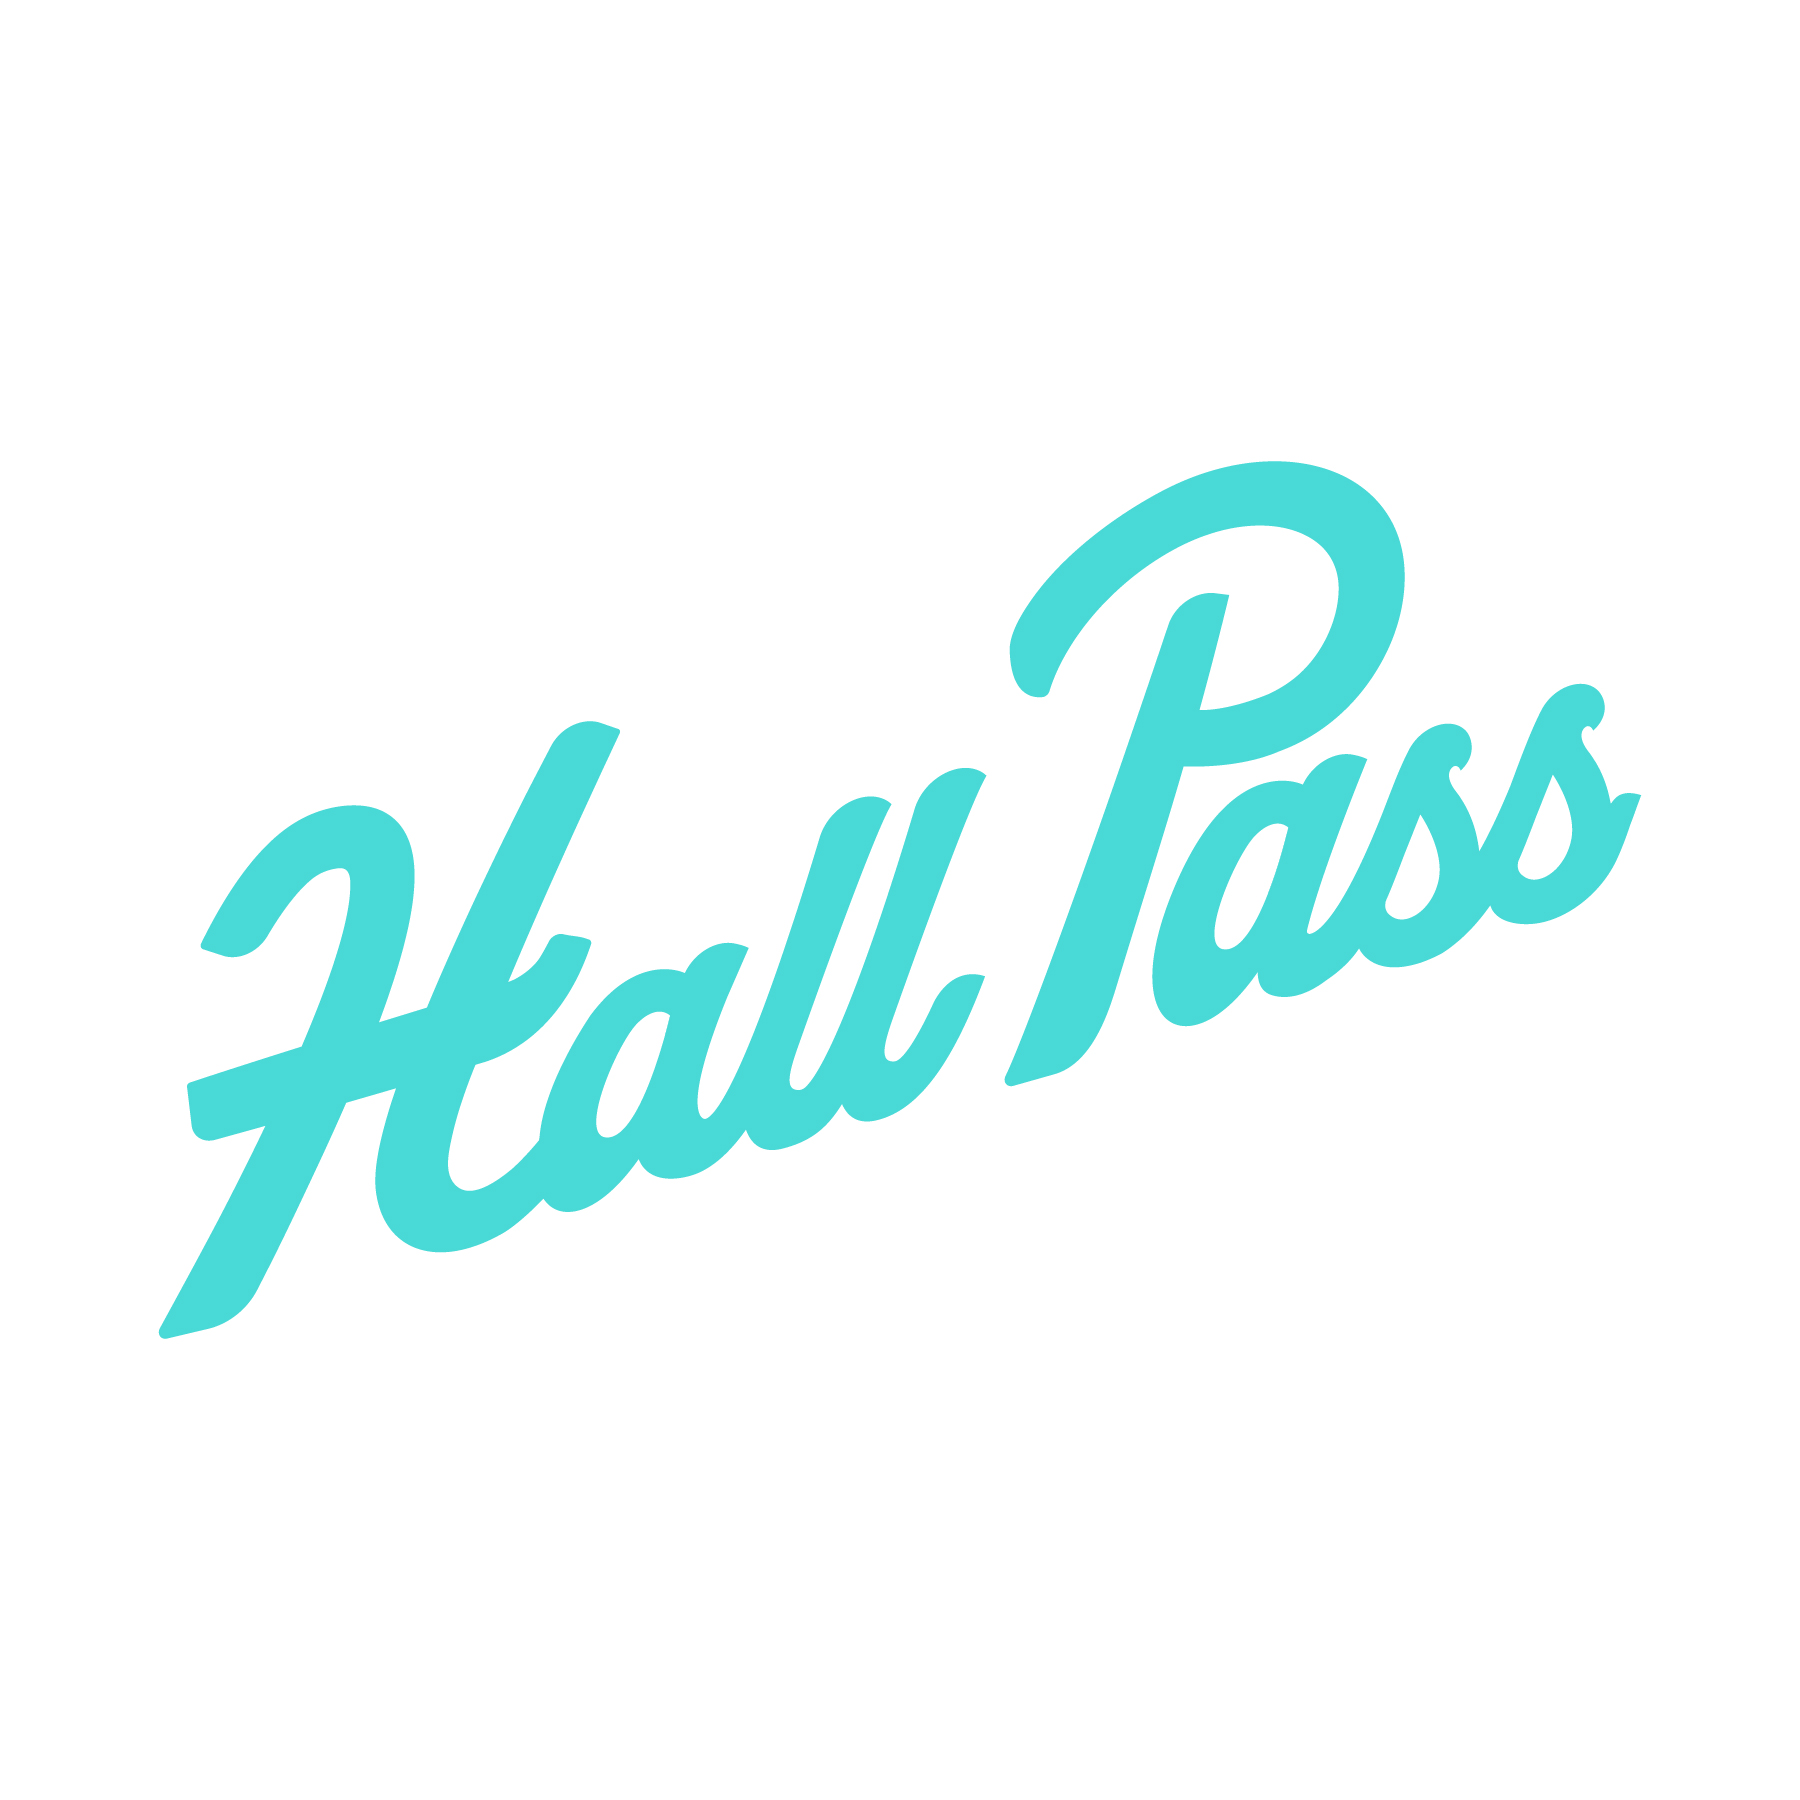 Hall Pass logo design by logo designer DISCIPLE for your inspiration and for the worlds largest logo competition